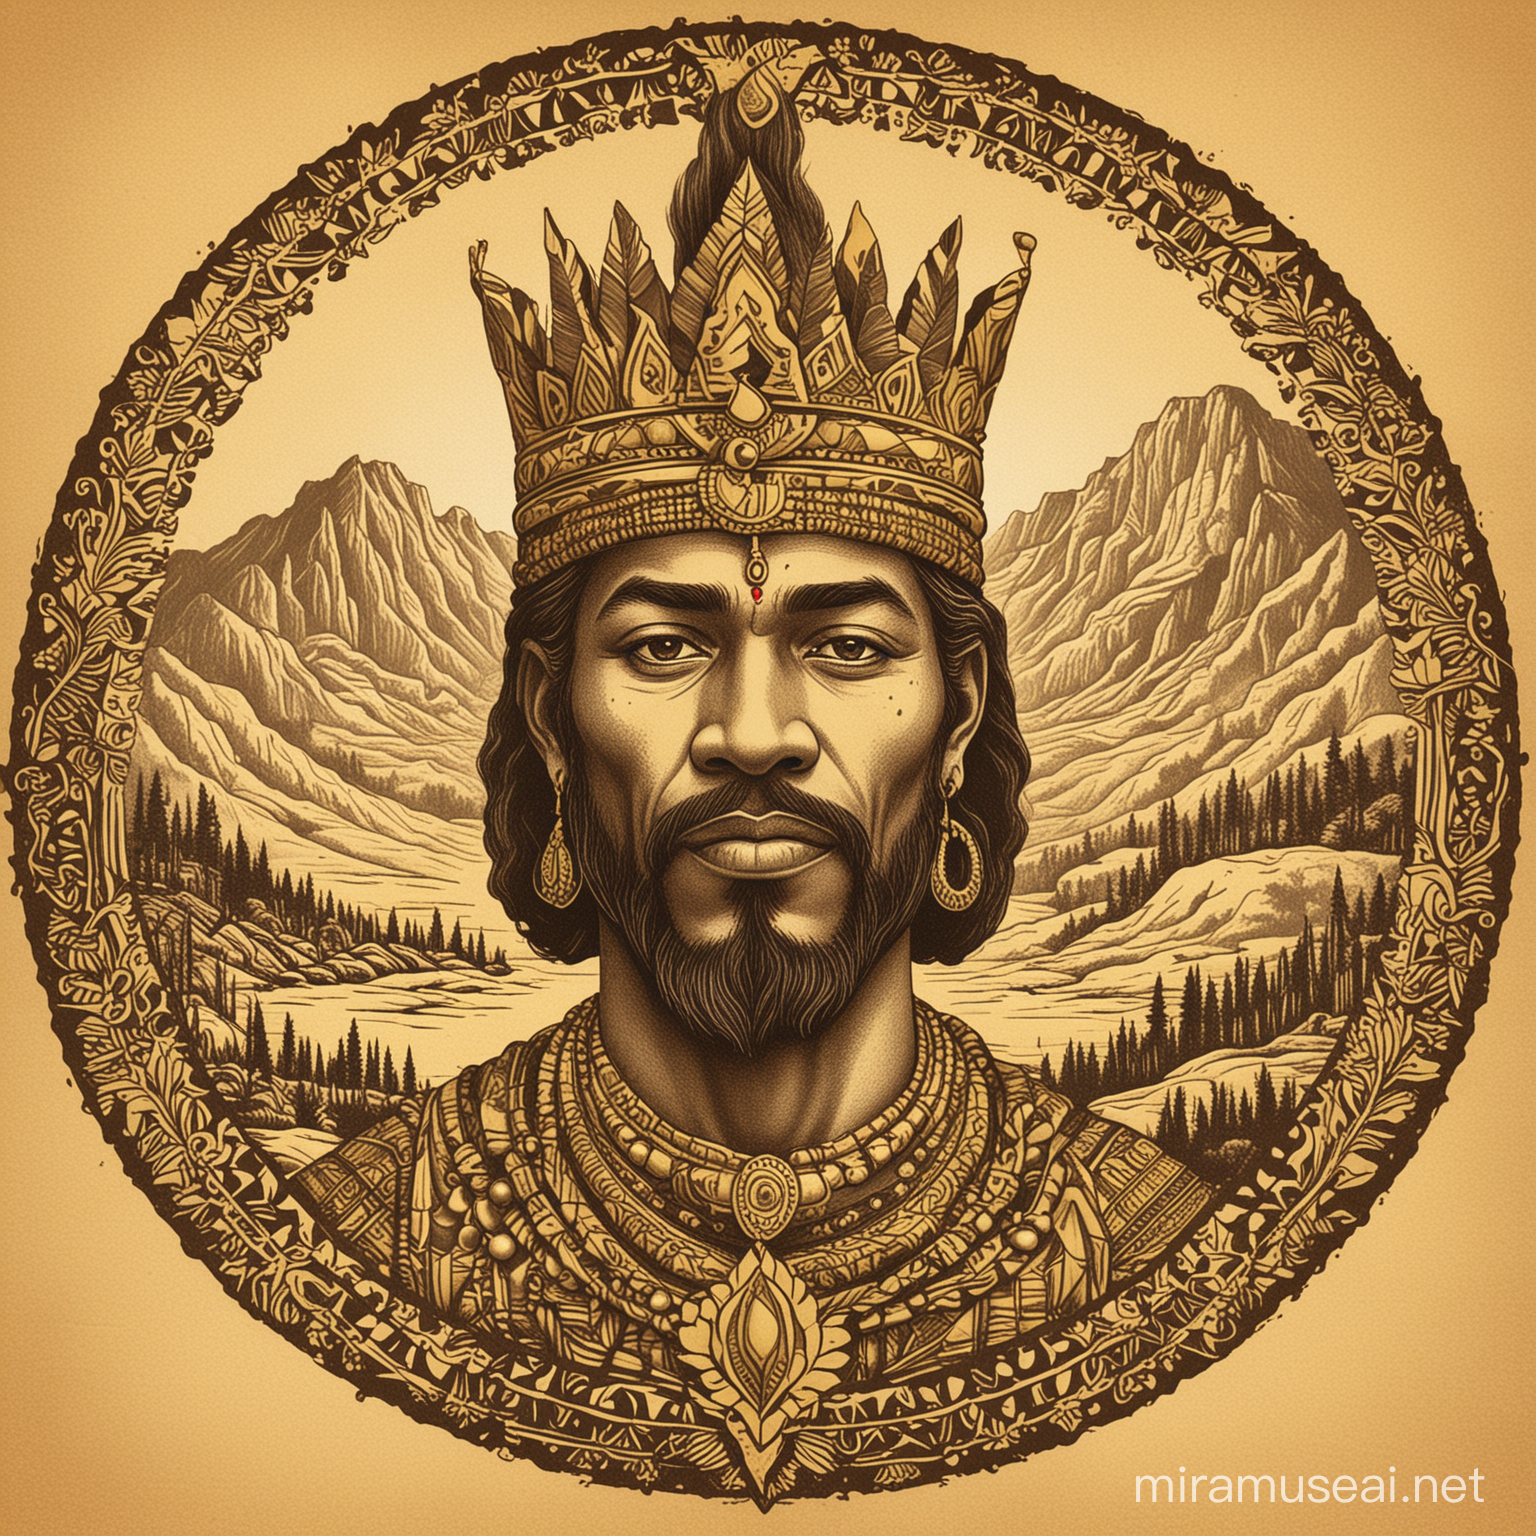 Circular IndianInspired Pencil Drawing Logo with African King and West Maui Mountains